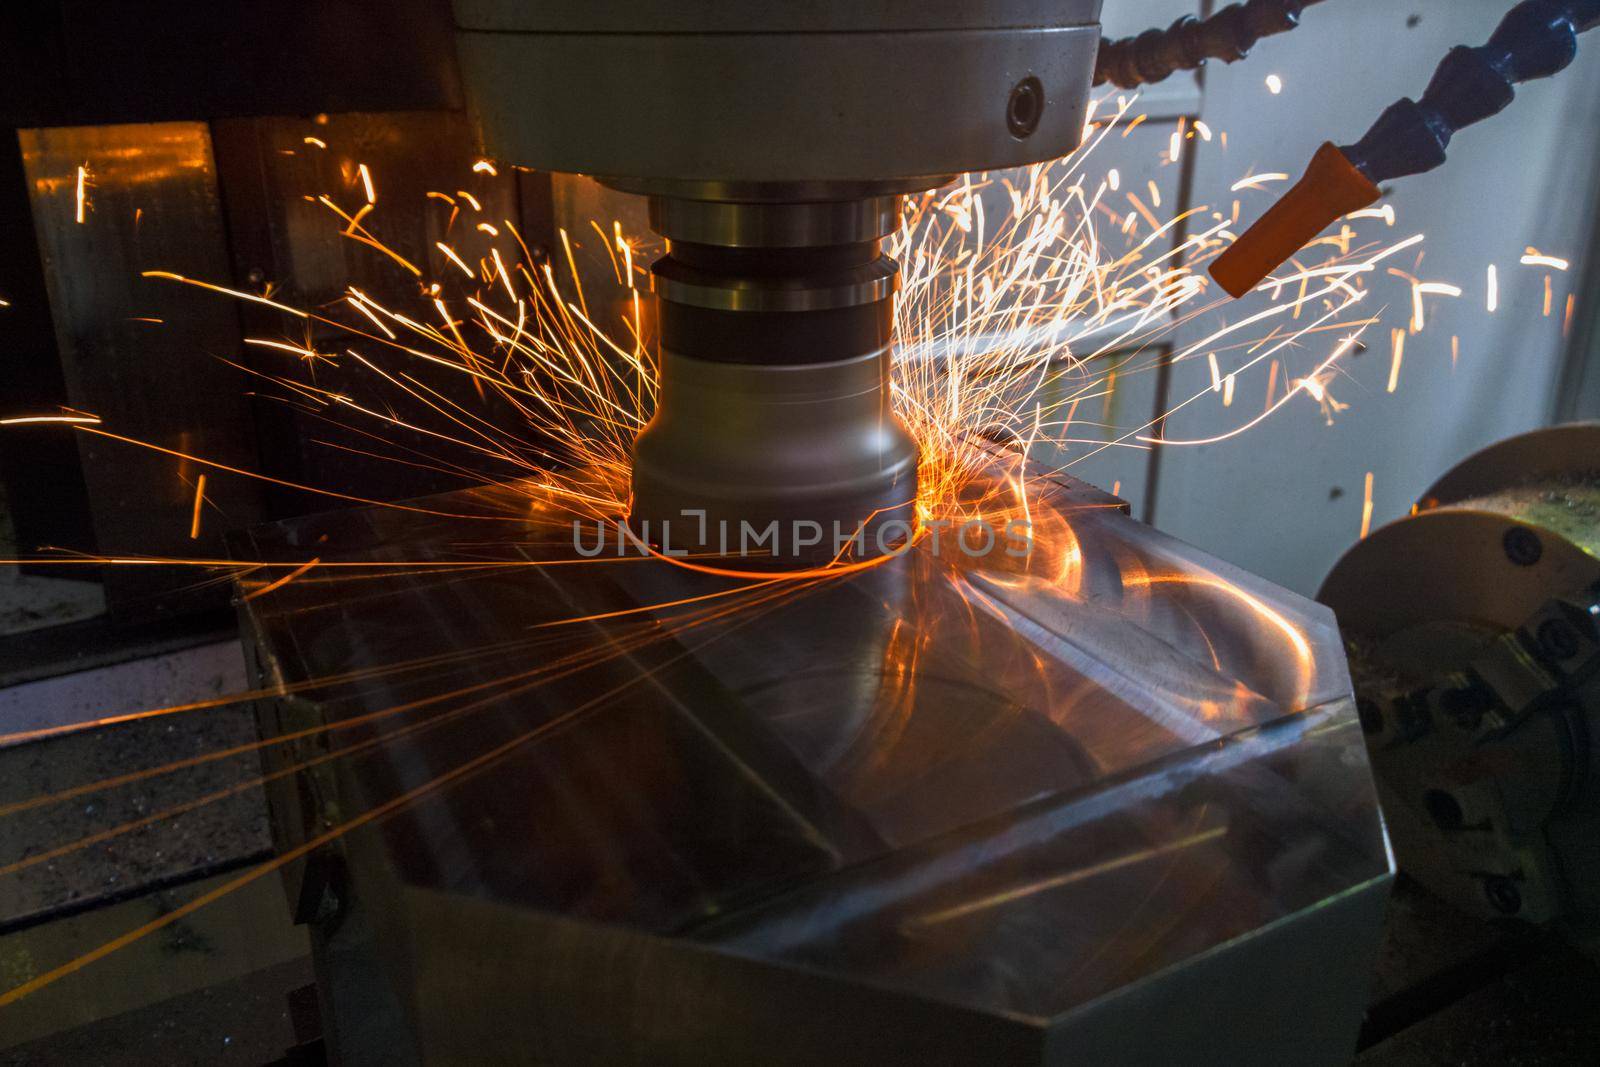 Heavy milling with sparks caused overheating due to wrong cutting feeds and speeds. Safety rules violation in manufacturing process. Selective focus technique in low light conditions.